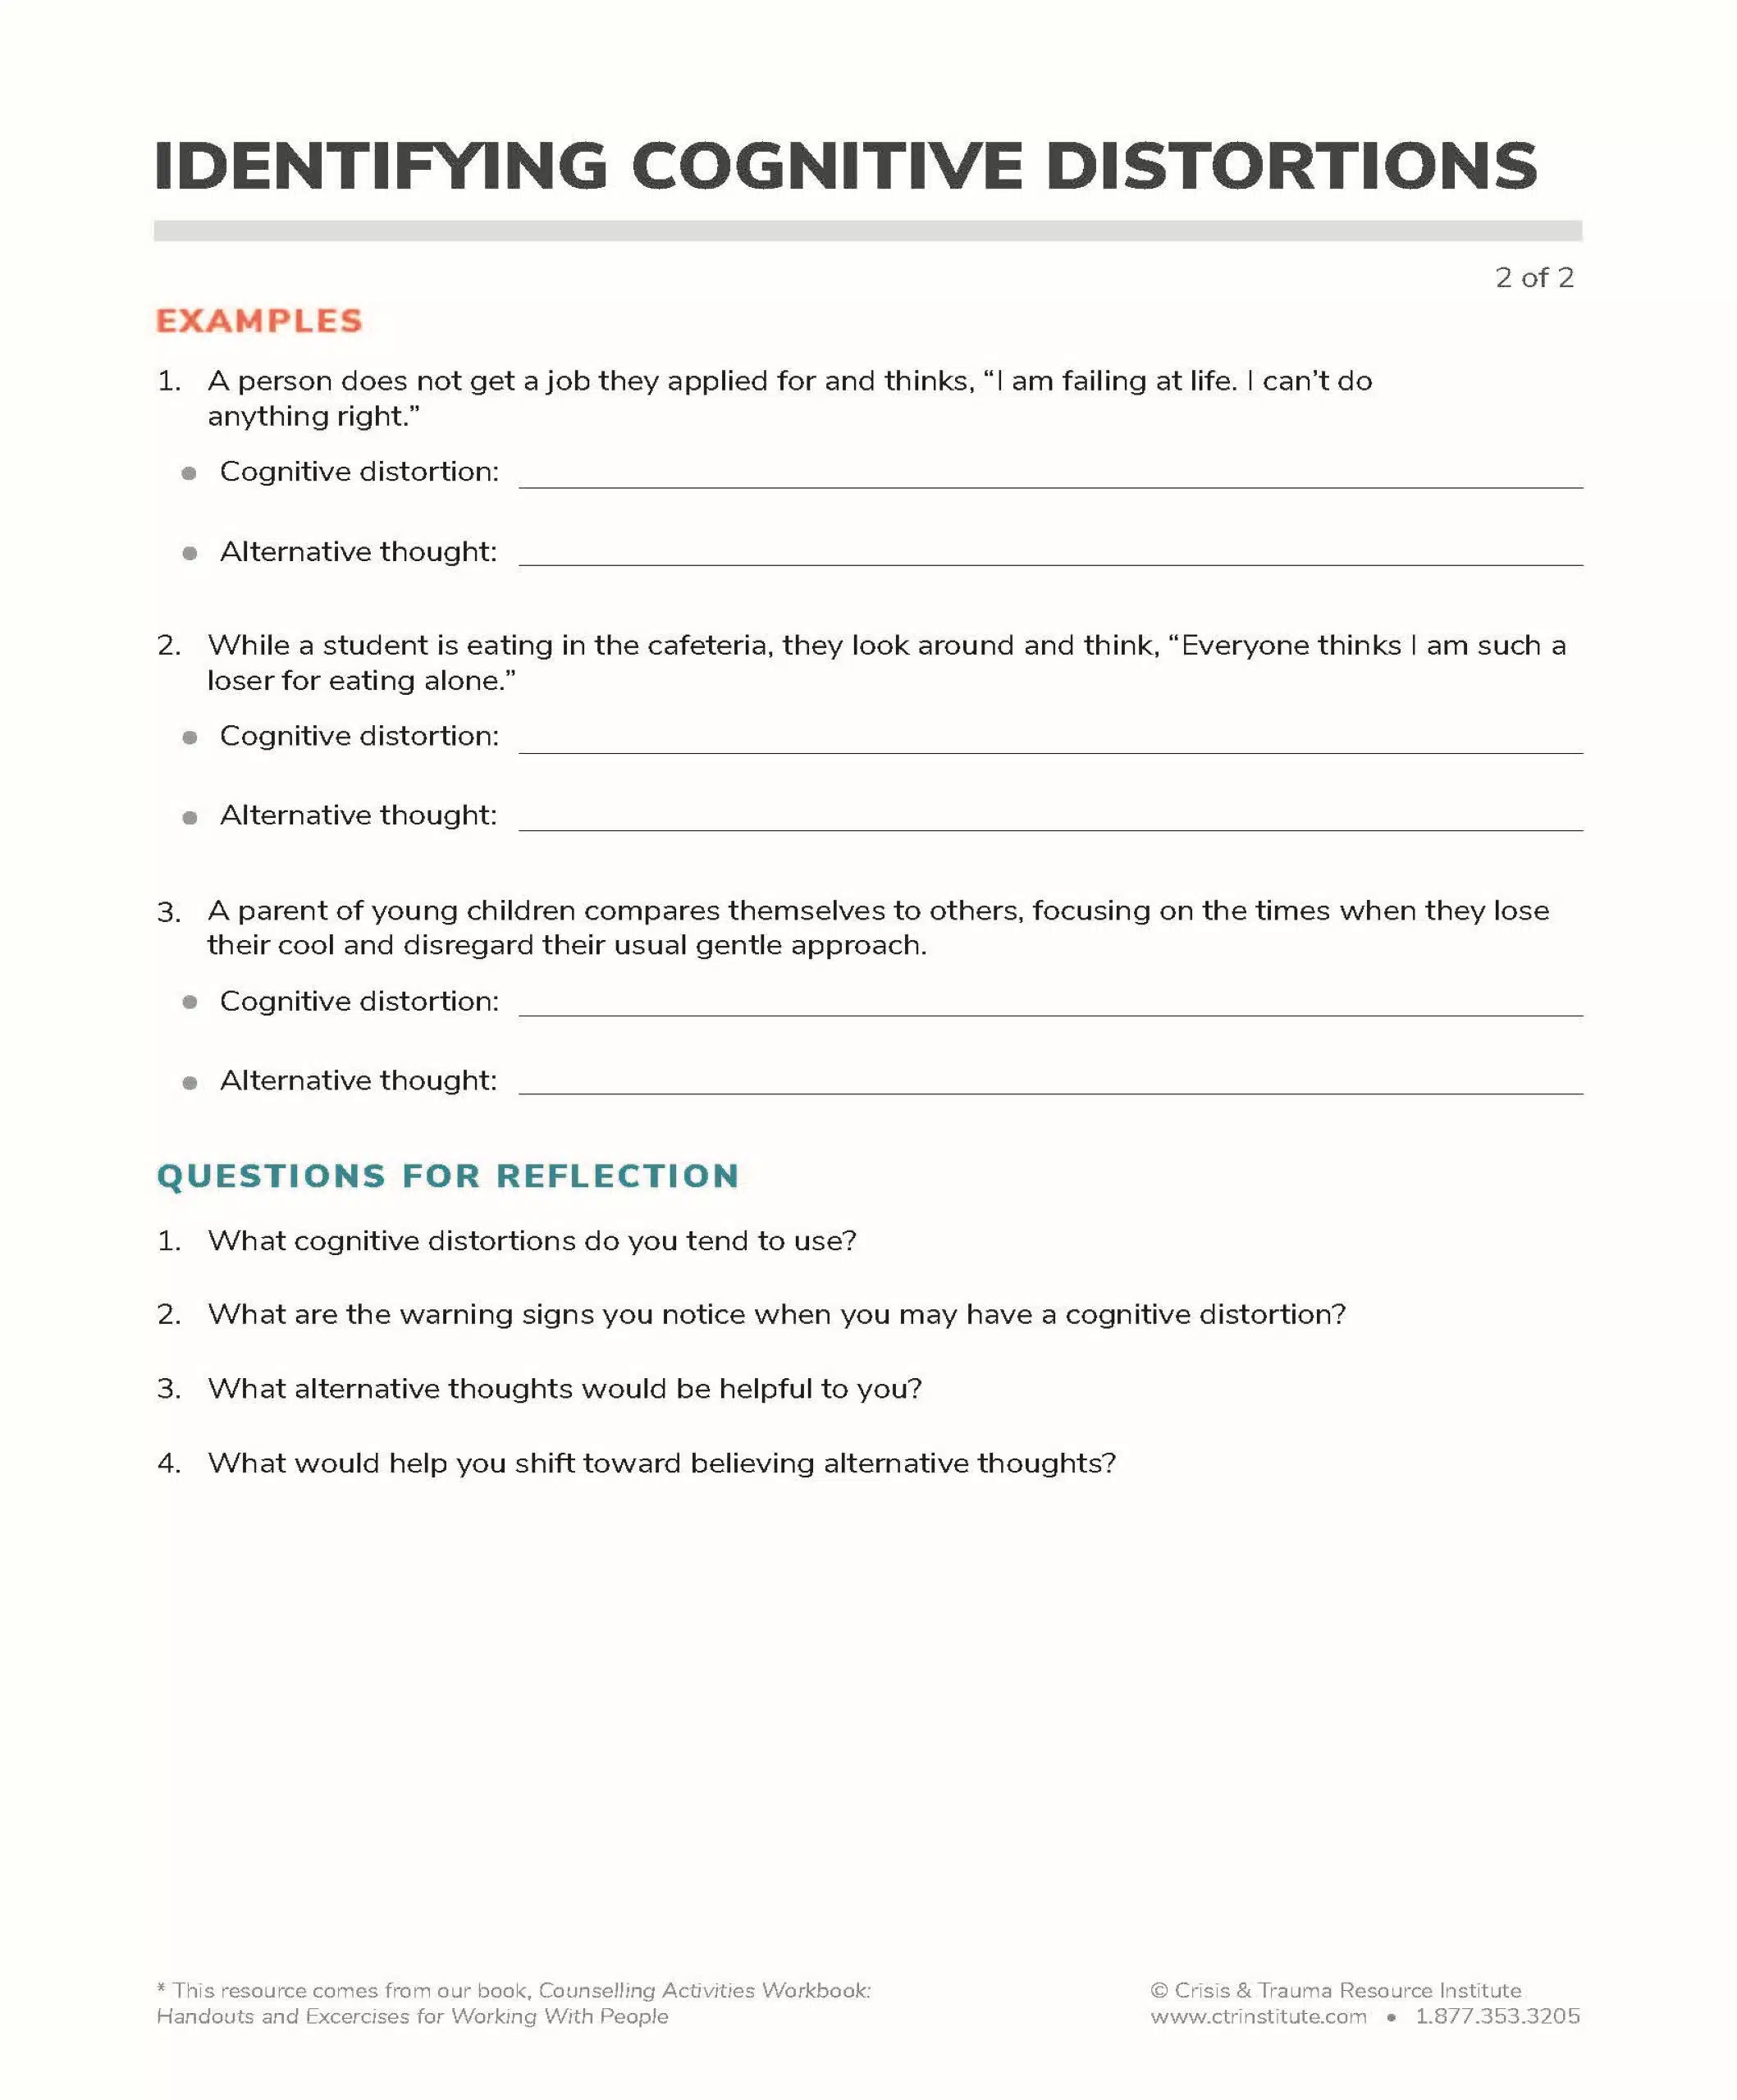 Identifying Cognitive Distortions Free Printable Handout Image